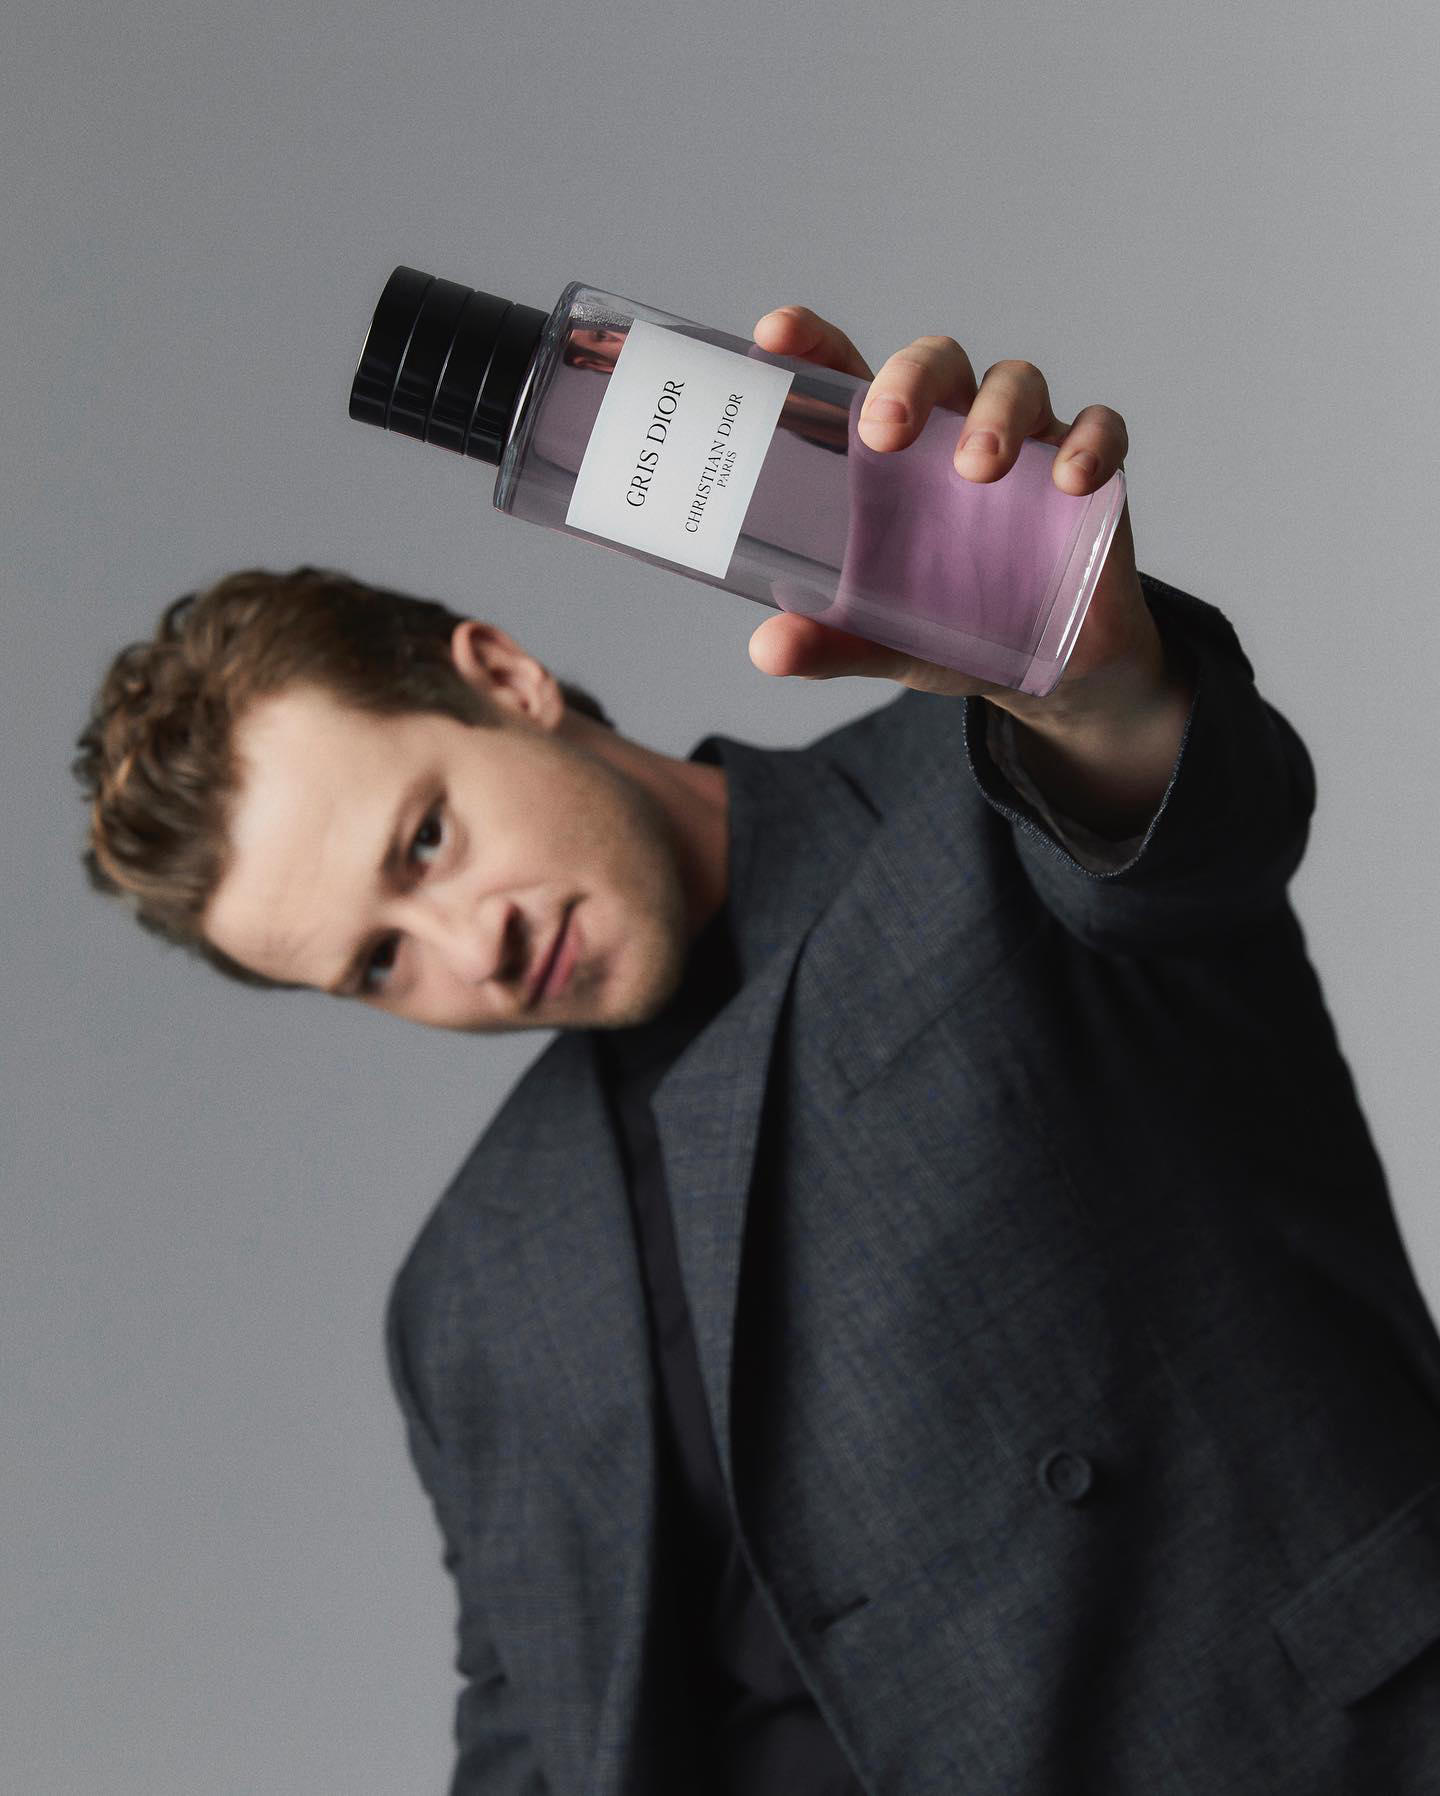 Dior Beauty Official - The House of Dior is pleased to welcome British actor #josephquinn as the fir